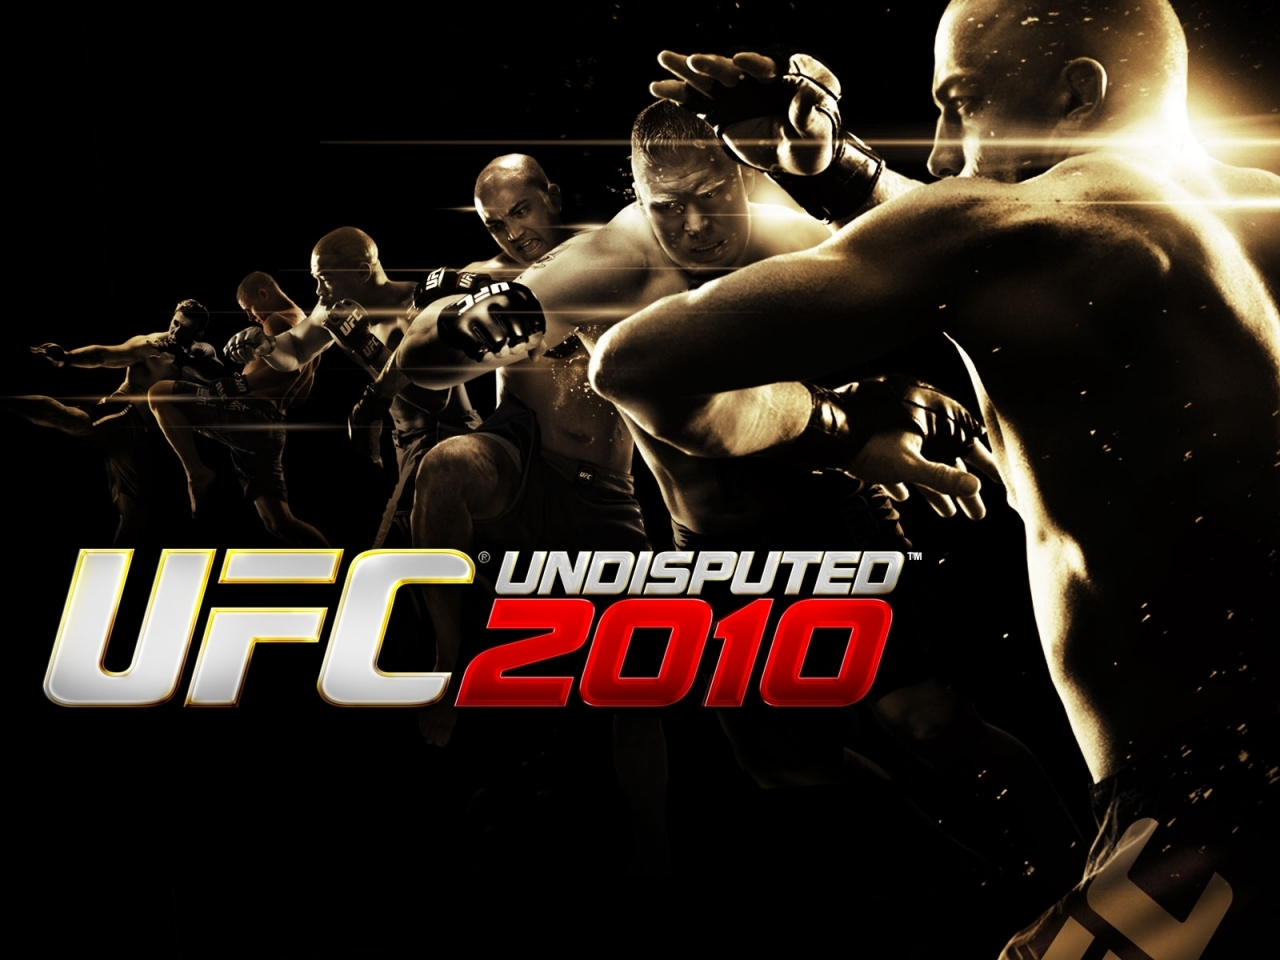 UFC Undisputed 2010 for 1280 x 960 resolution